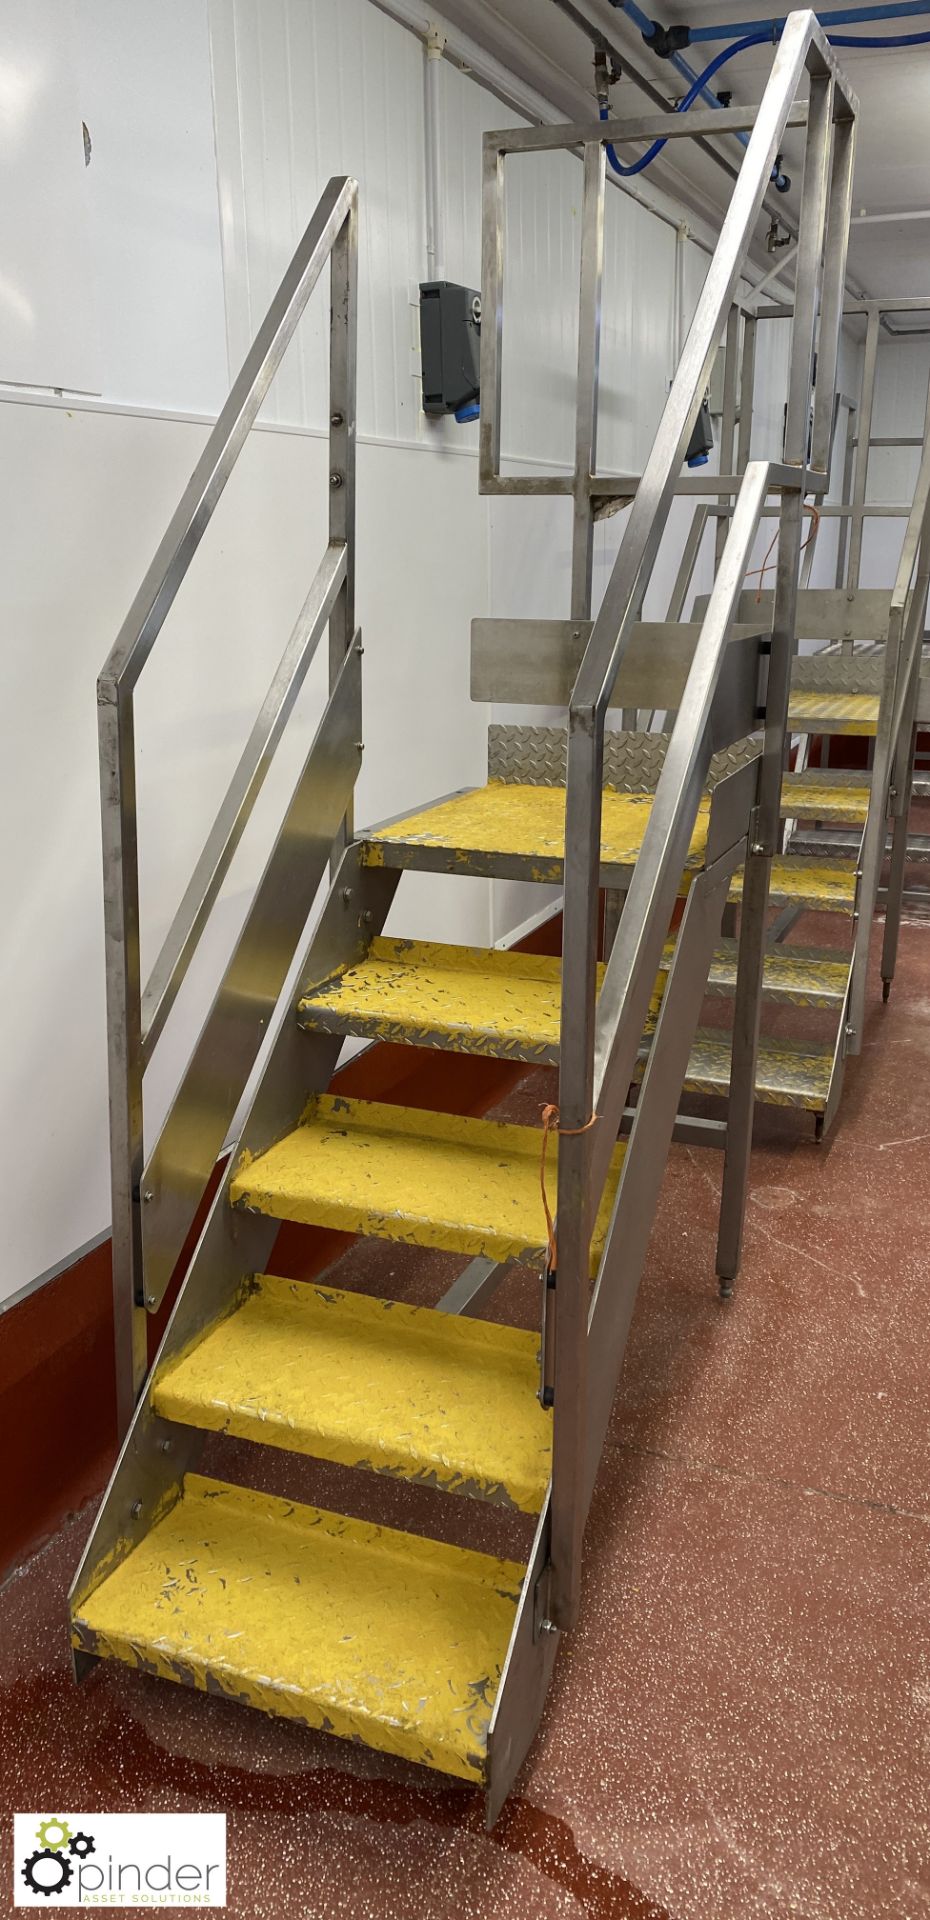 Stainless steel 5-tread Gantry Steps (Lift Out Fee: £10 plus VAT) - Image 2 of 4